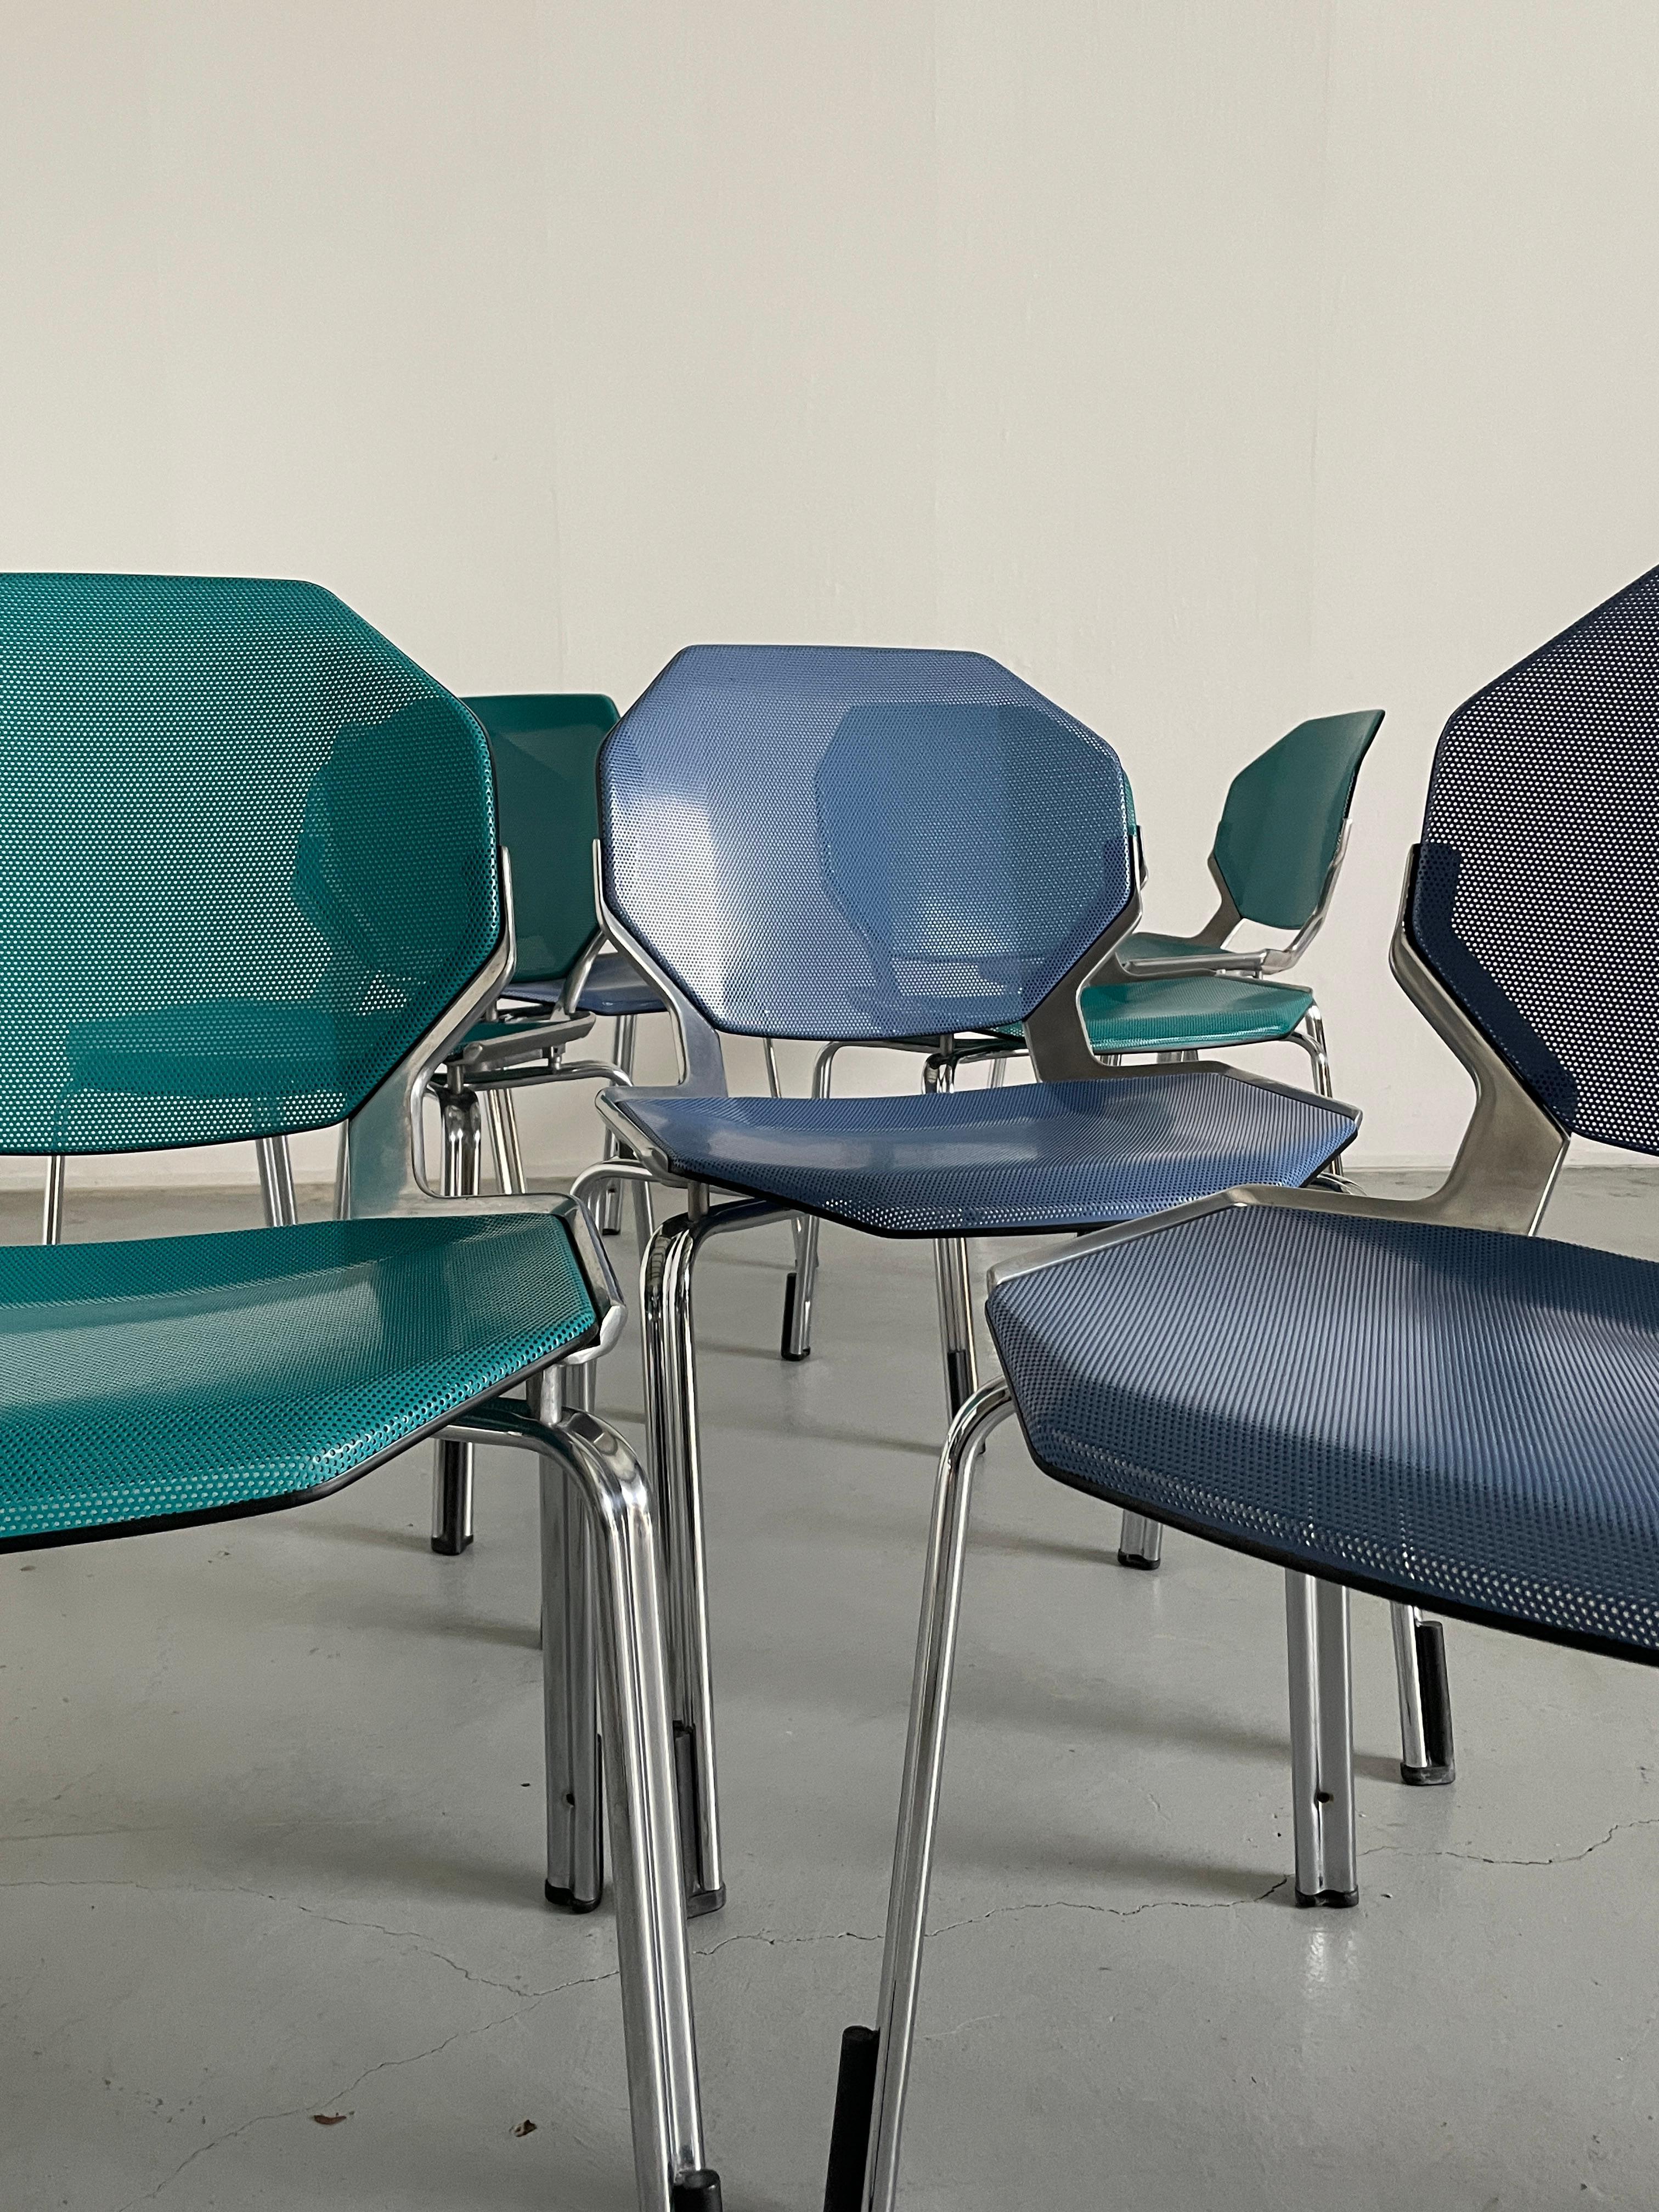 Space Age Futuristic Octagonal Stackable Dining Chairs by Fröscher Sitform, 90s For Sale 6